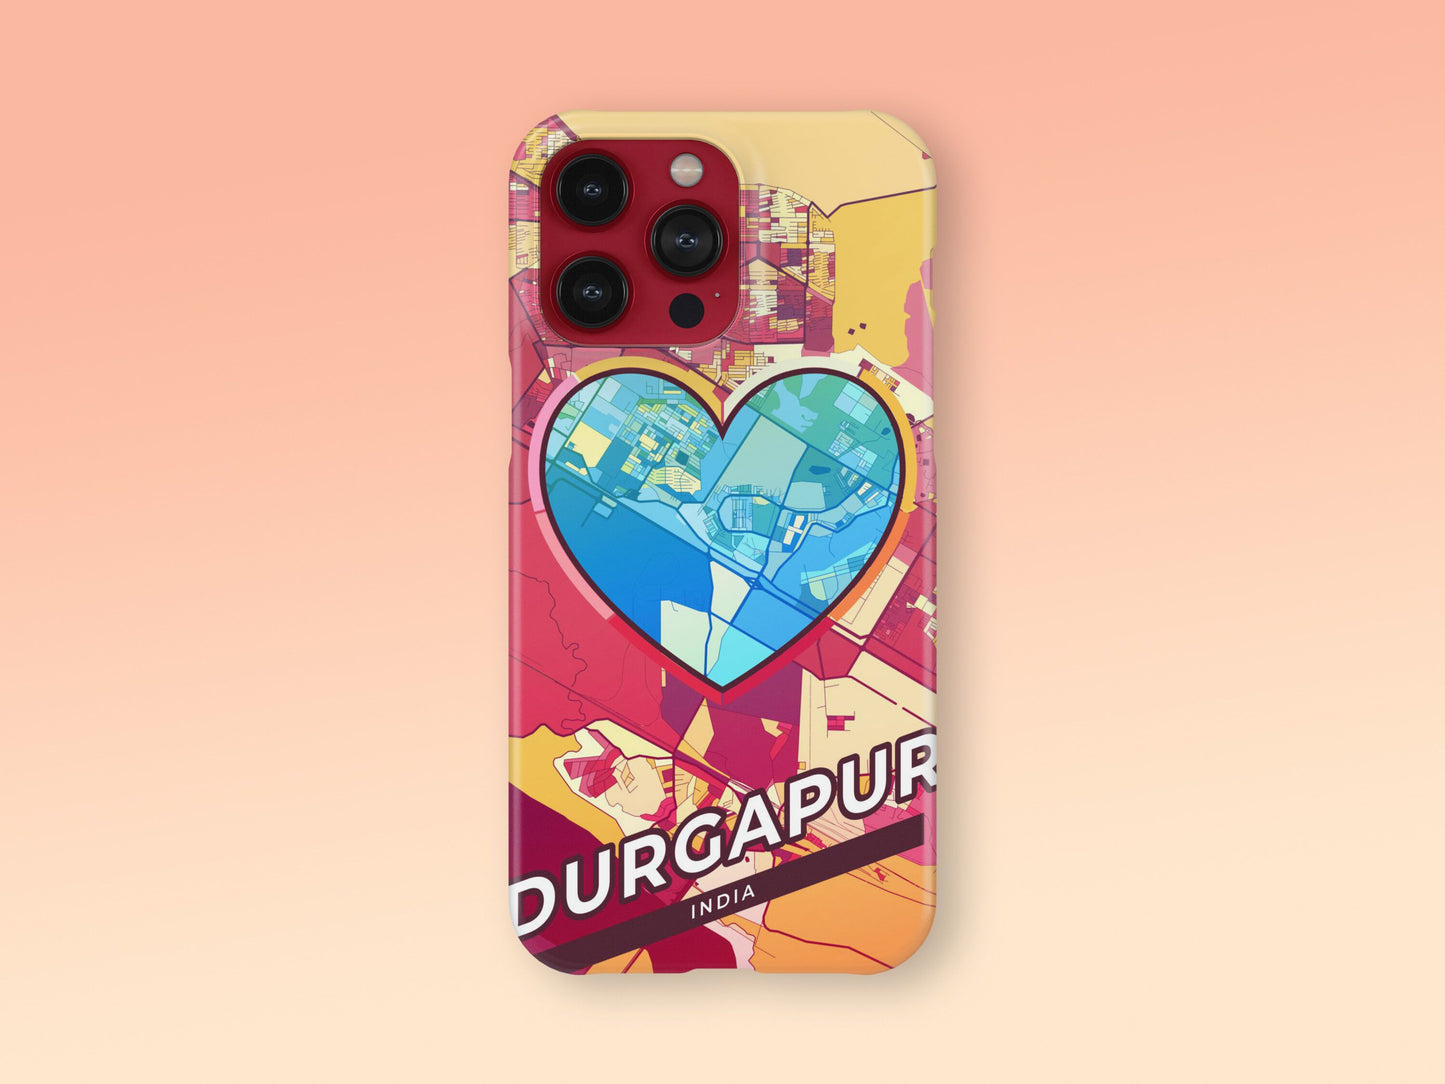 Durgapur India slim phone case with colorful icon. Birthday, wedding or housewarming gift. Couple match cases. 2